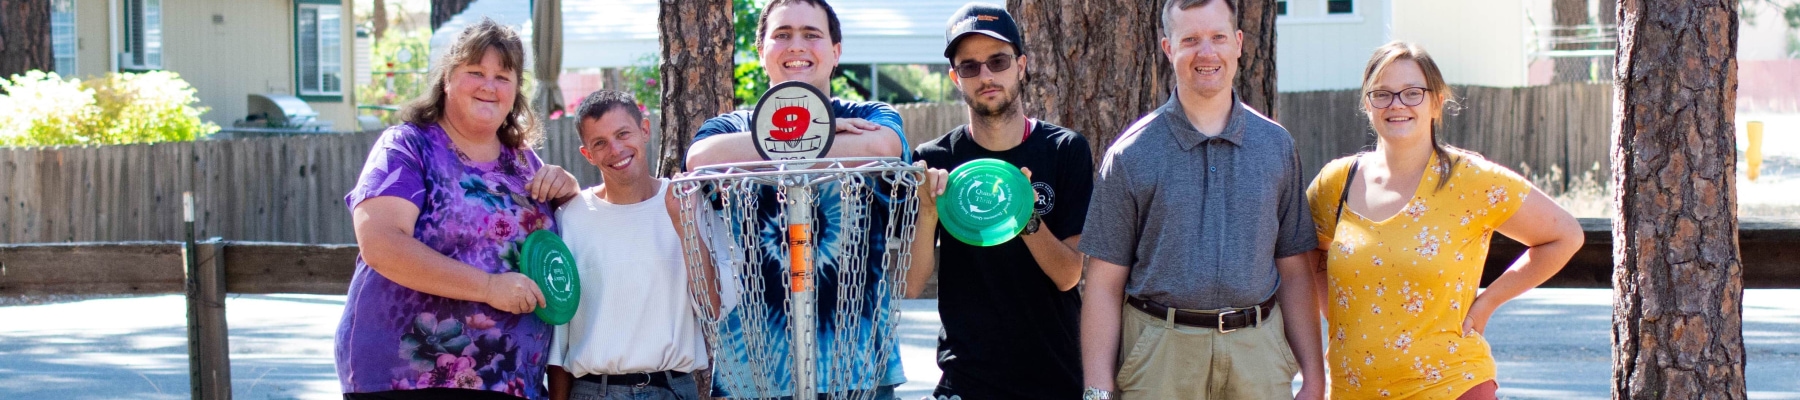 ALIVE_Consumers_Disc_Golf_01-0004.jpg